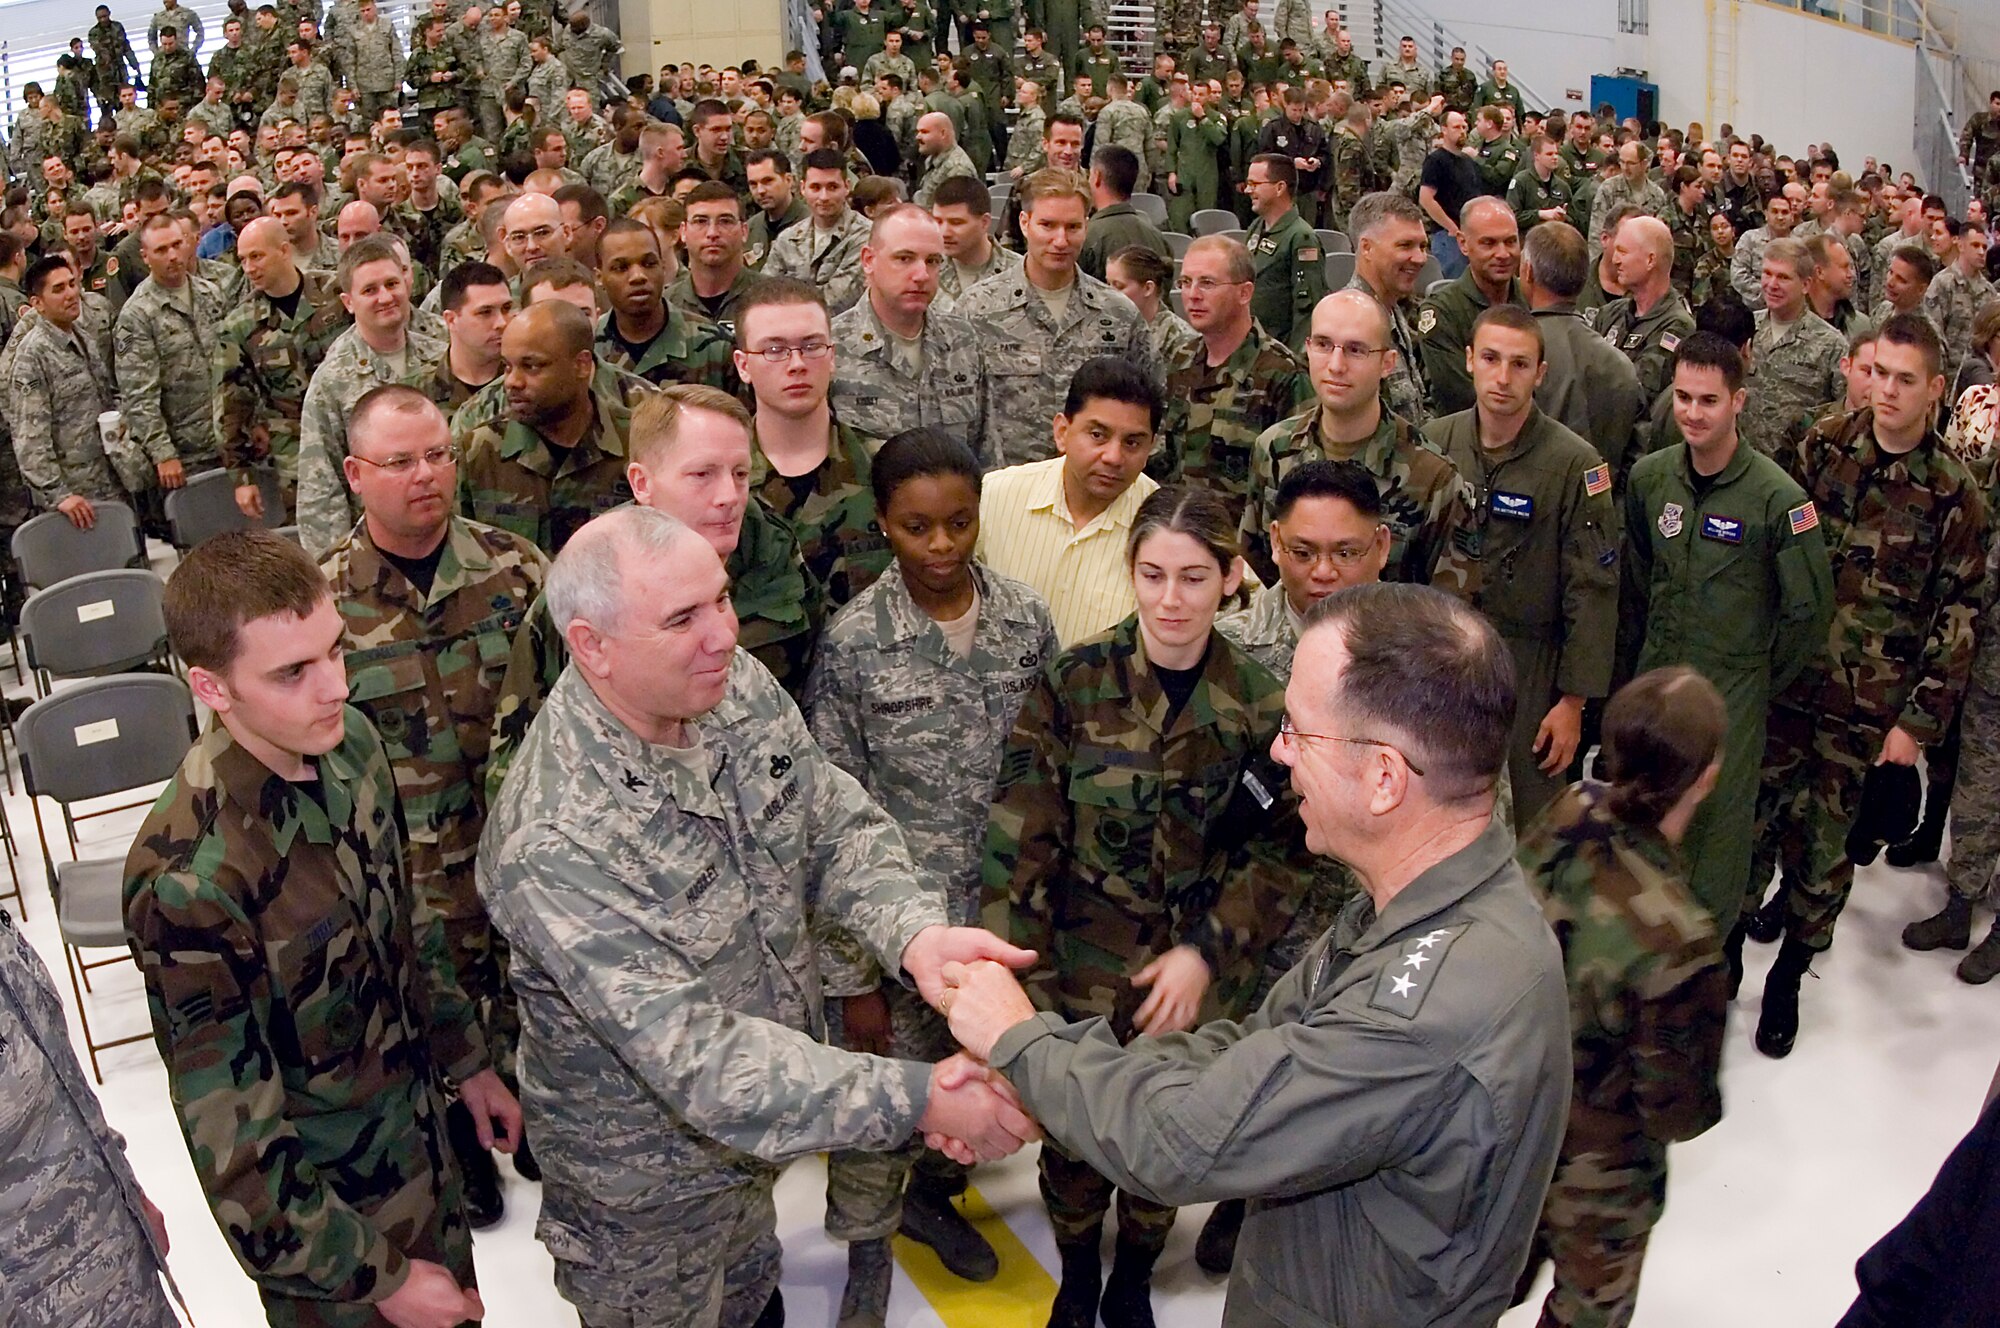 Navy Adm. Mike Mullen, chairman of the Joint Chiefs of Staff and the nation's top military officer, hands a coin to Col. Jon Huguley, 446th Maintenance Group commander, Thursday after a briefing in Hangar 9. During the briefing, Admiral Mullen thanked Airmen and family members for their contributions, outlined some changes and challenges the military will face in the future and discussed the importance of leadership. (U.S. Air Force photo/Abner Guzman)